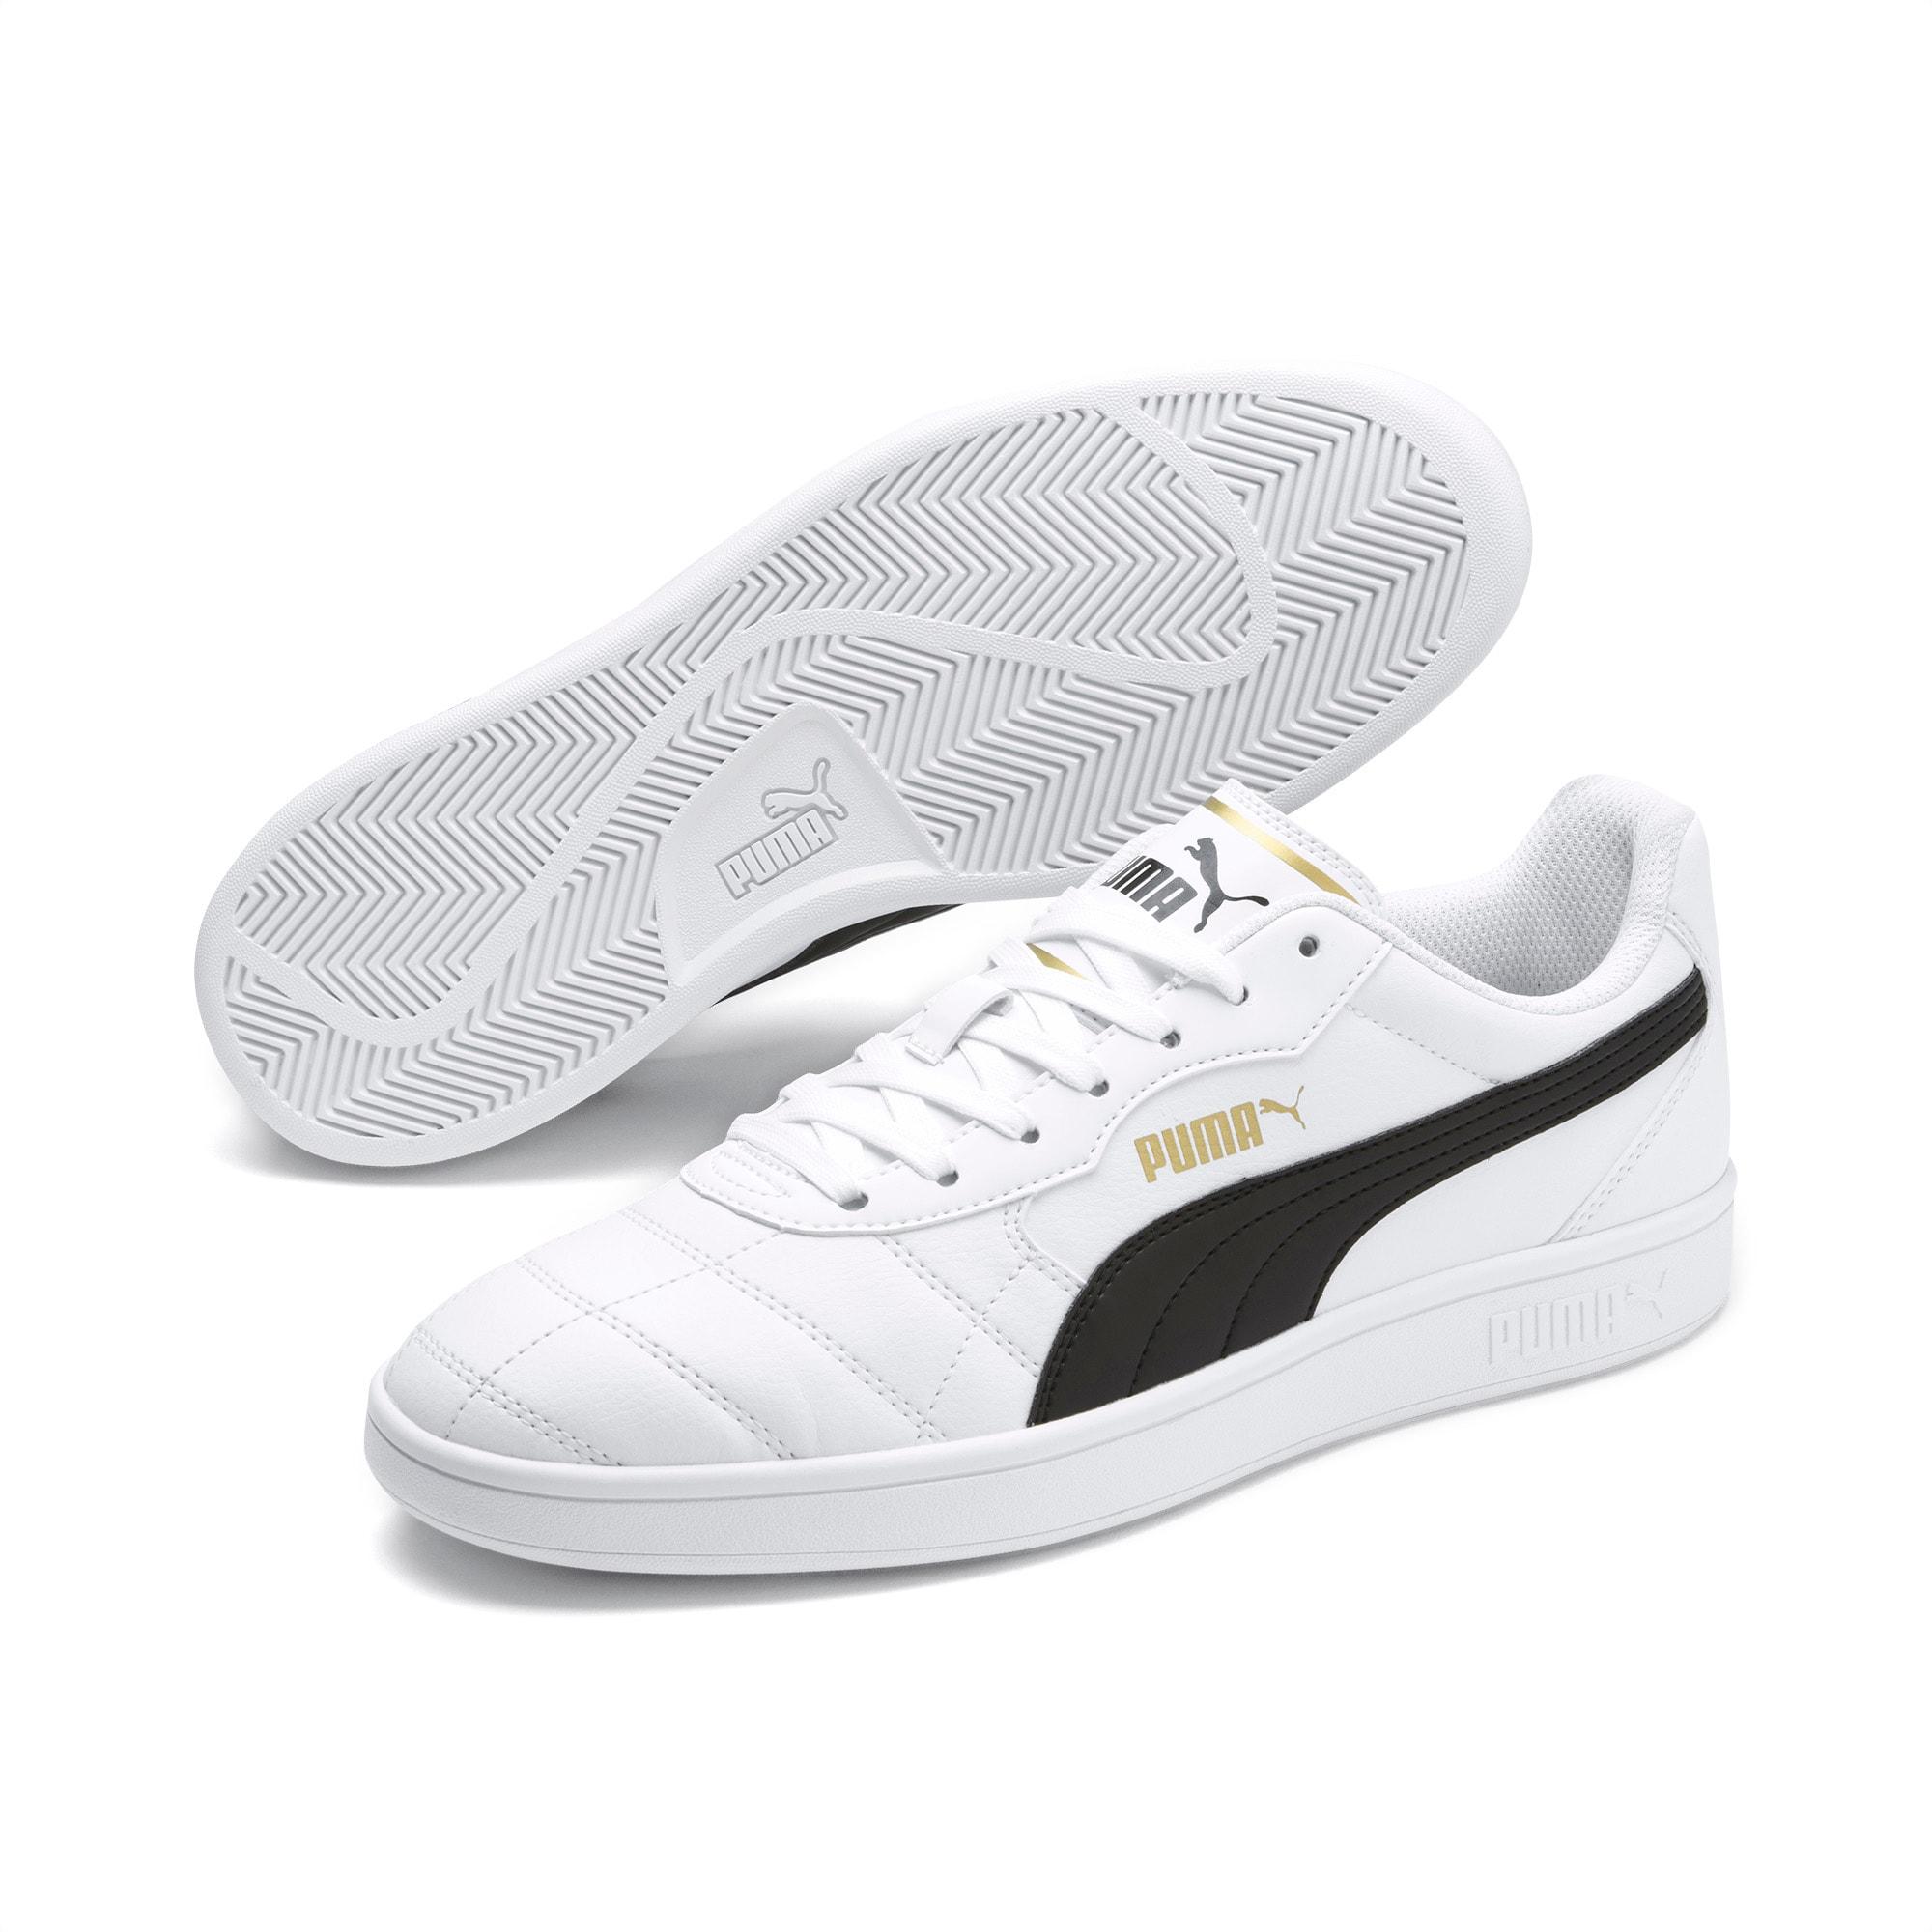 PUMA Synthetic Astro Kick Sl Sneakers in White for Men - Lyst